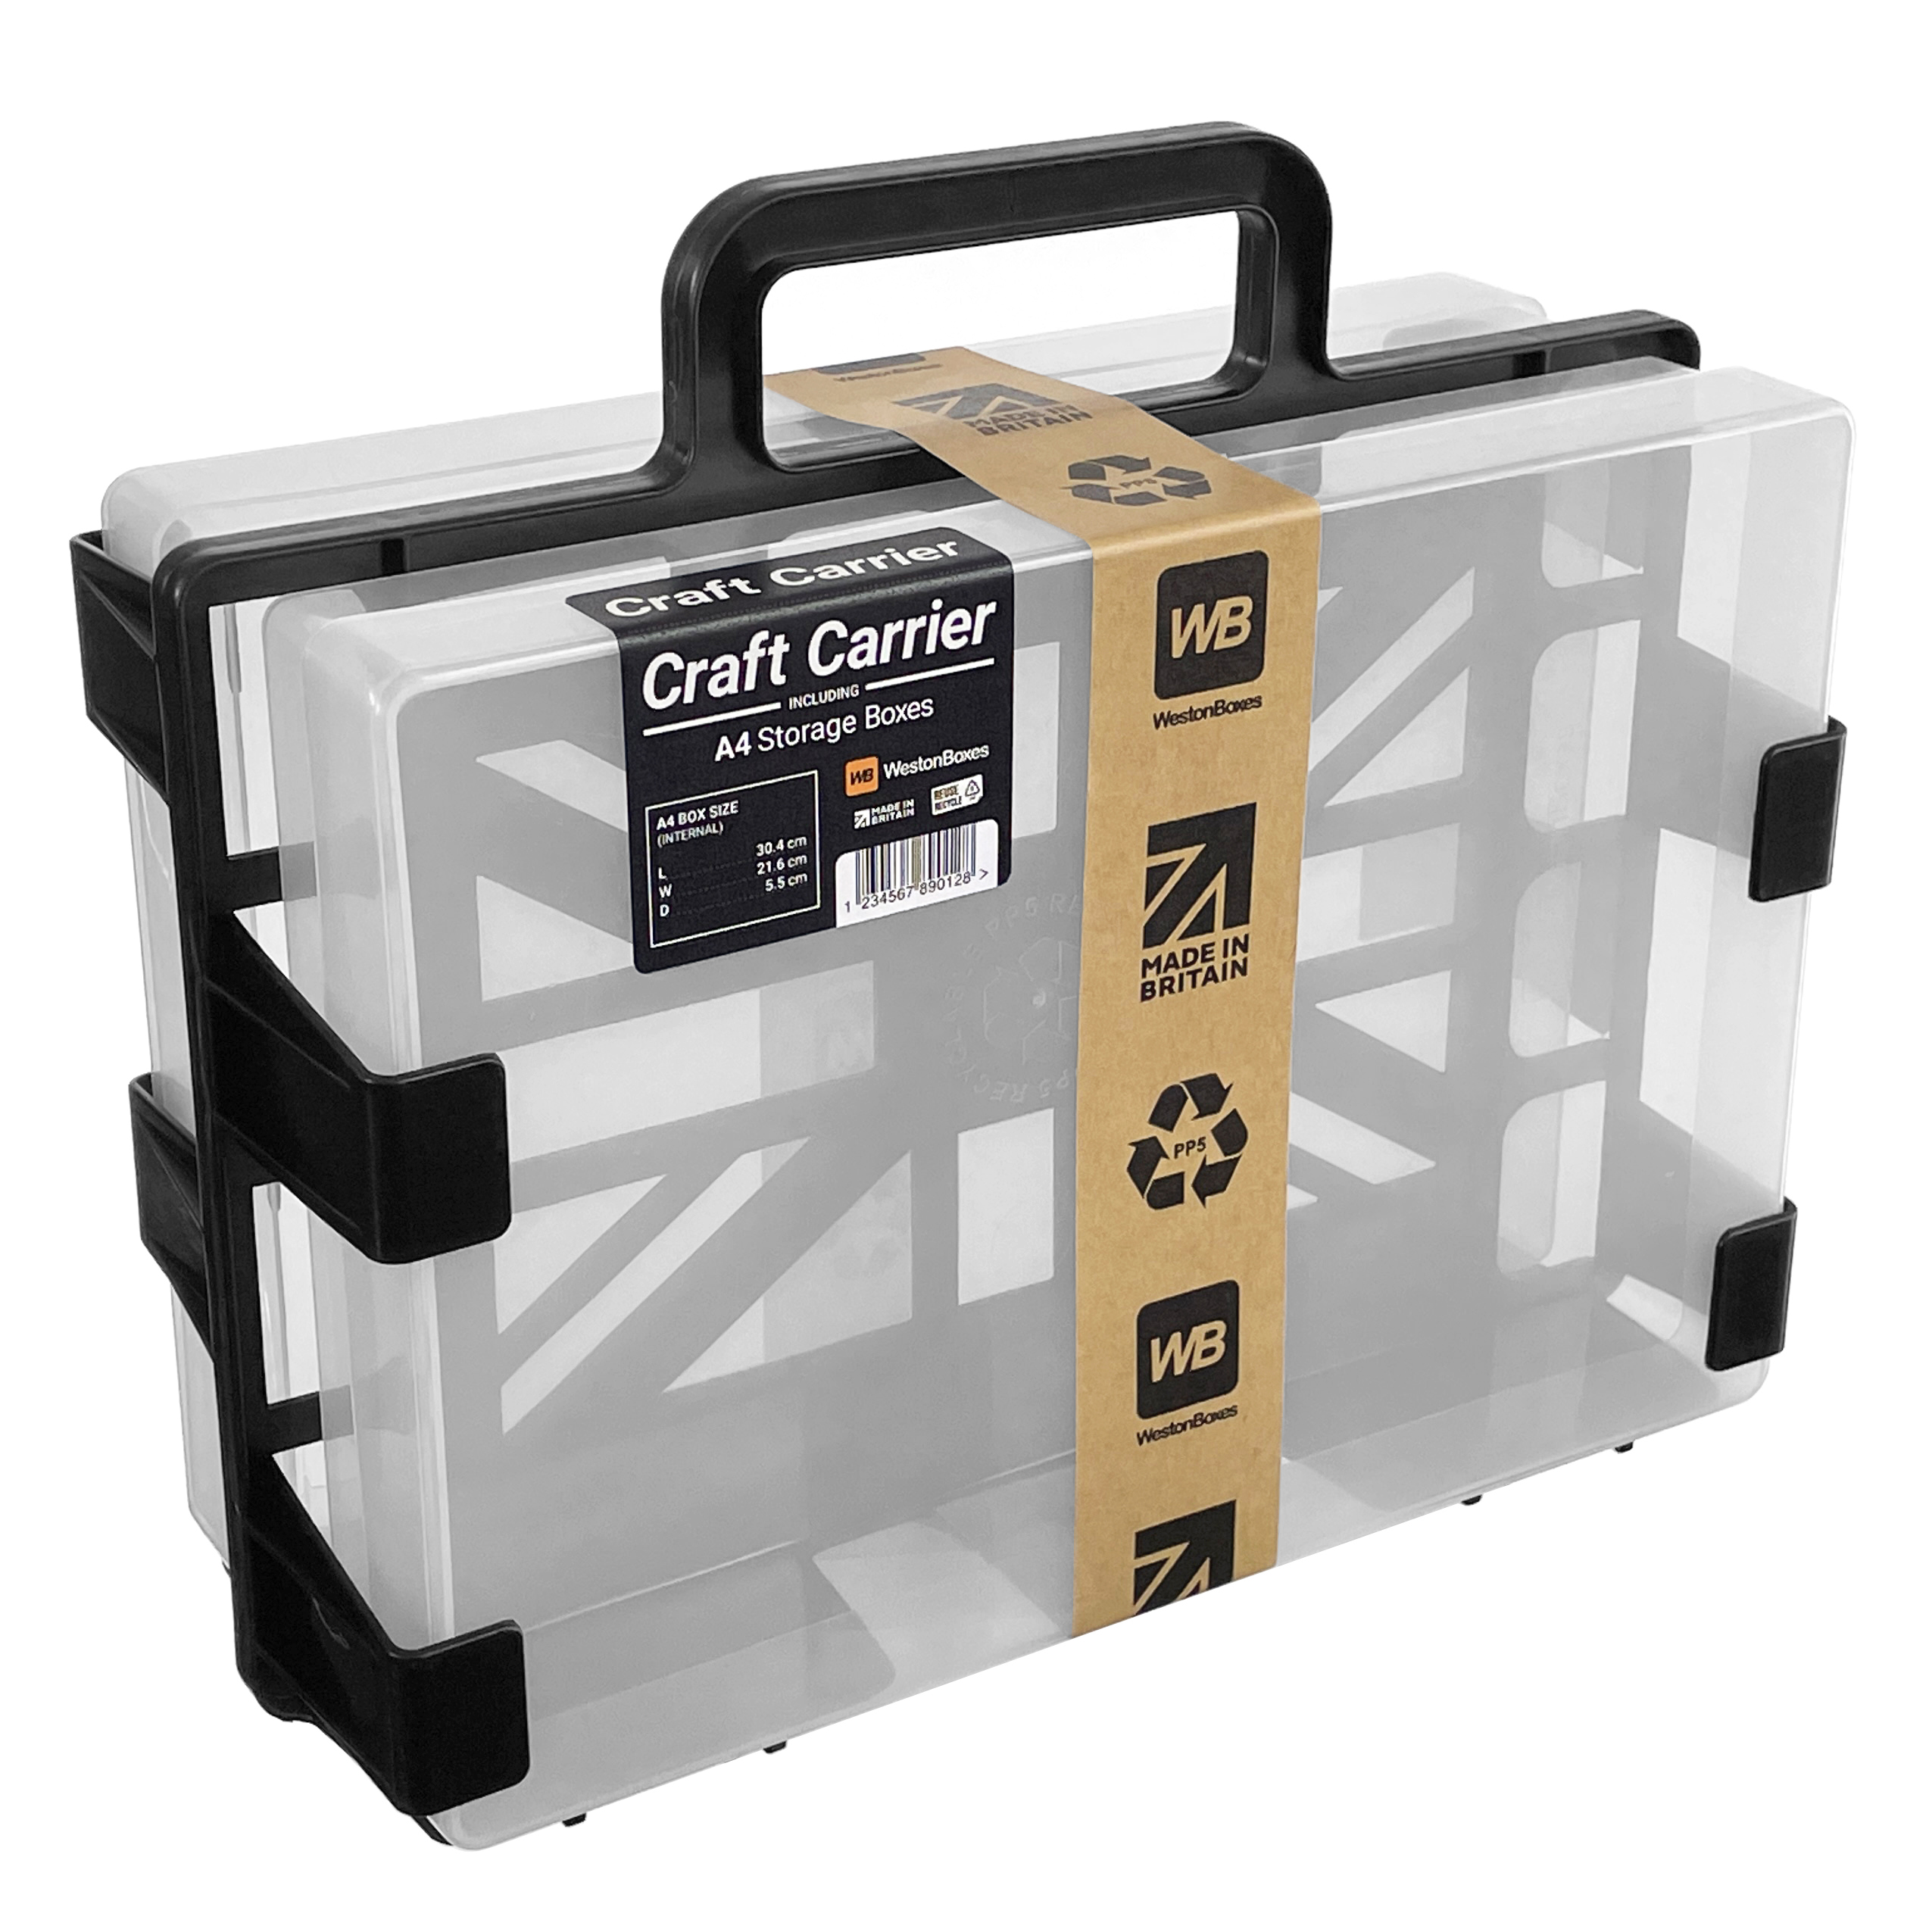 Craft Carrier with 2 A4 Storage Boxes